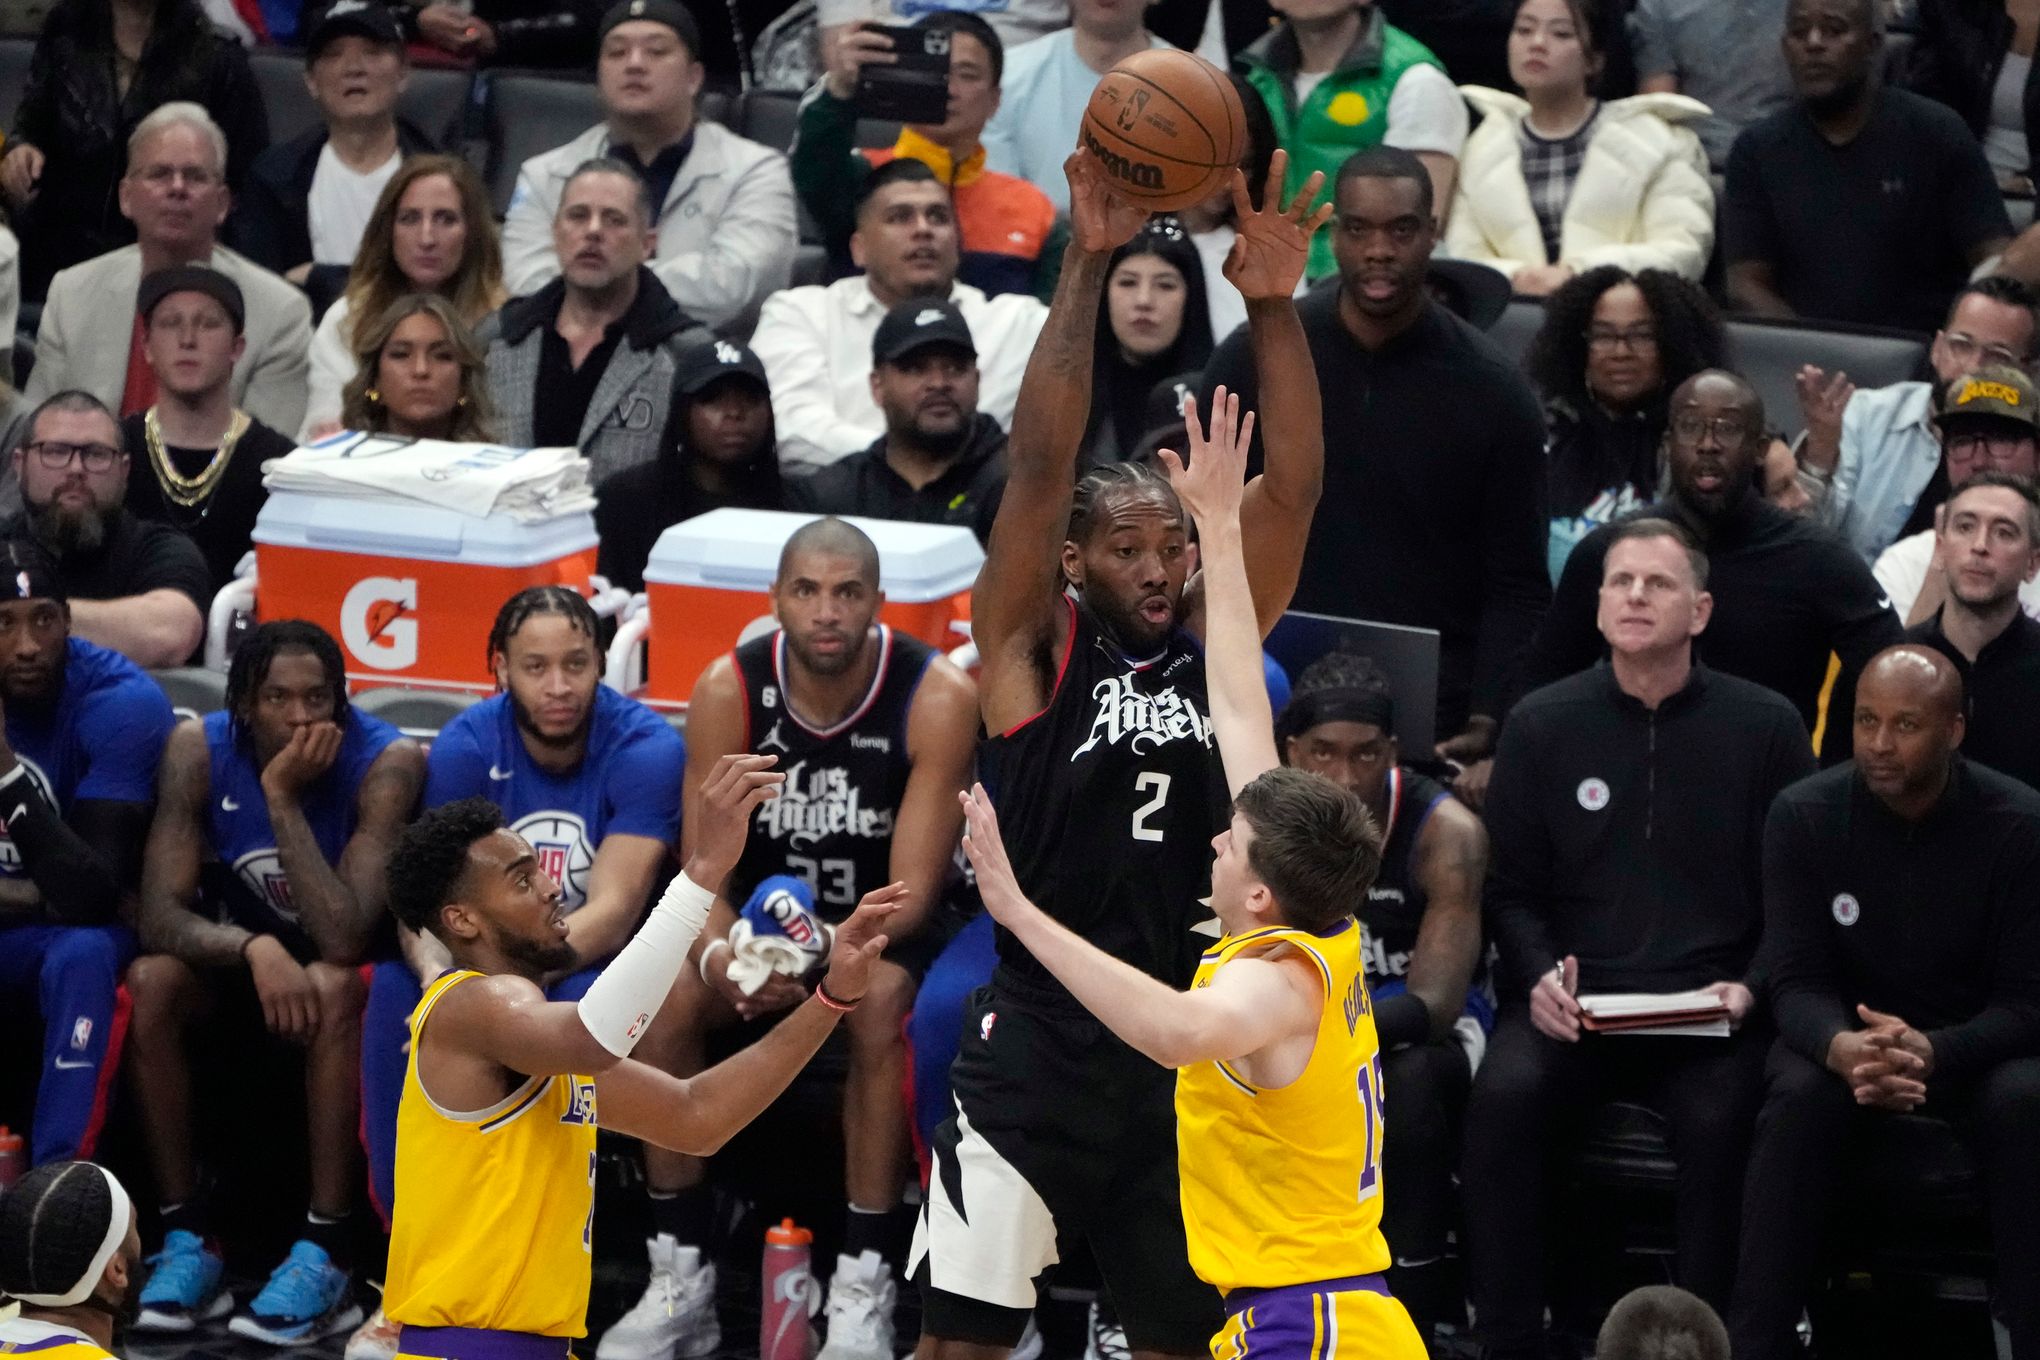 Kawhi Leonard scores 27 points as Clippers rally past Blazers